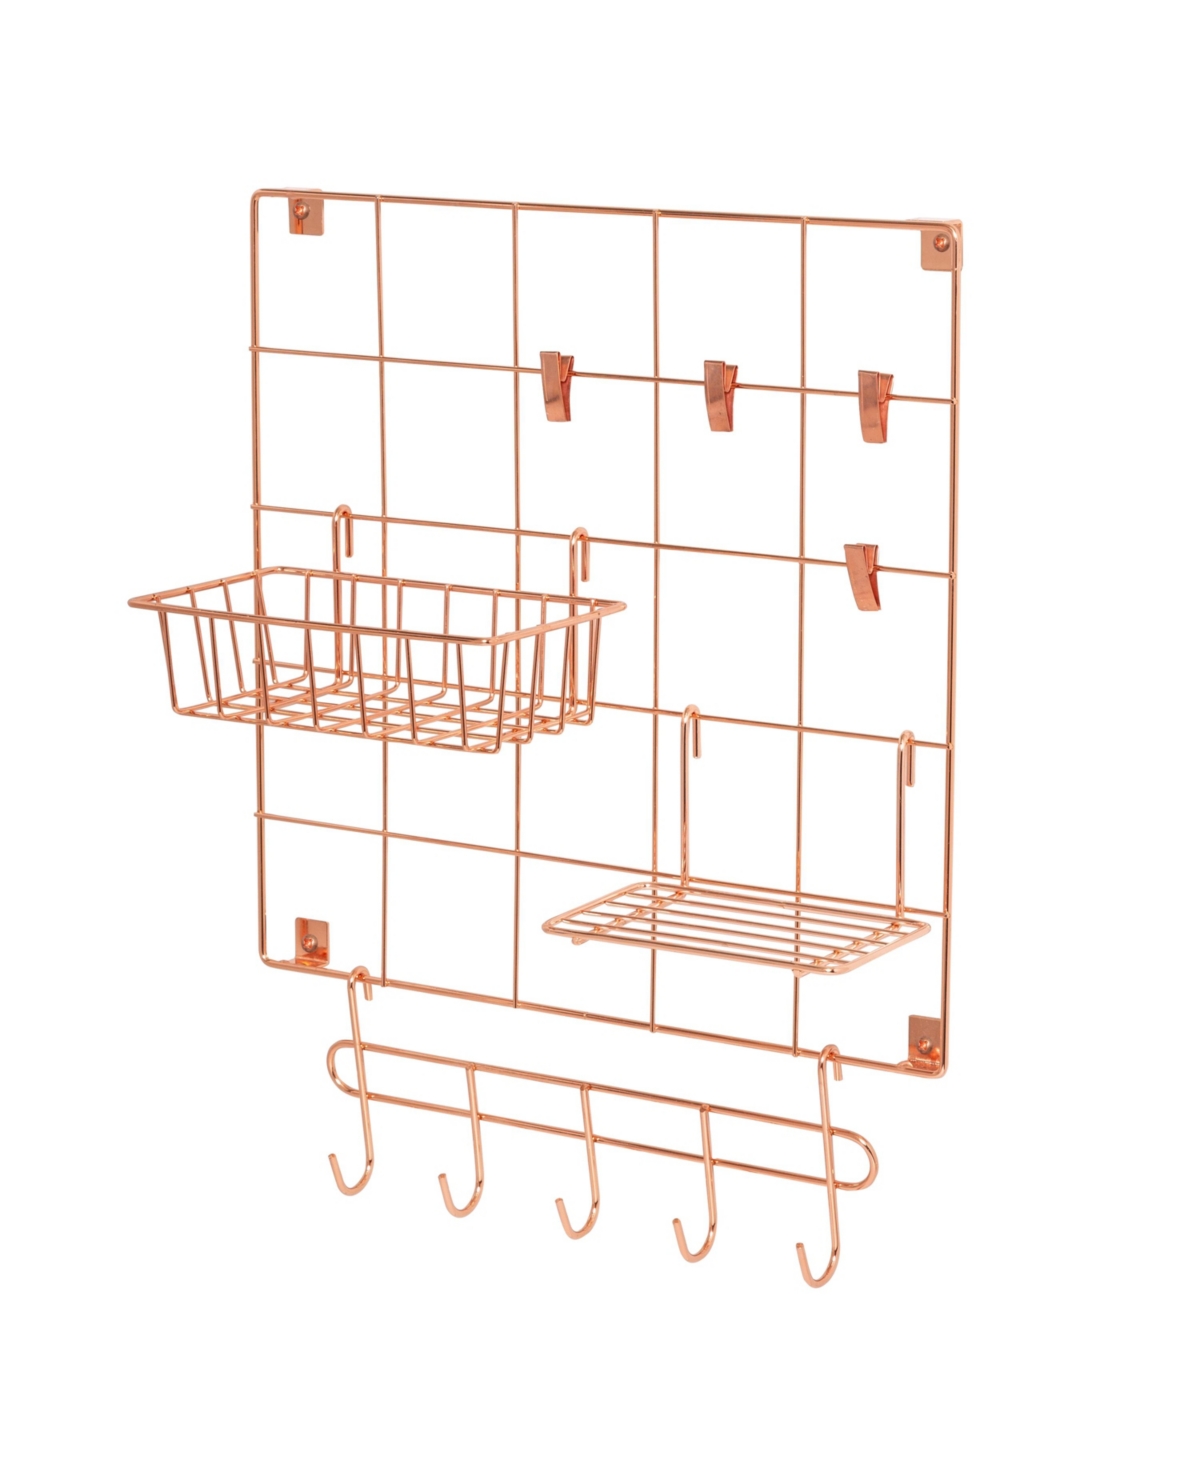 8-Pc. Copper Wire Wall Grid with Storage Accessories - Rose Gold